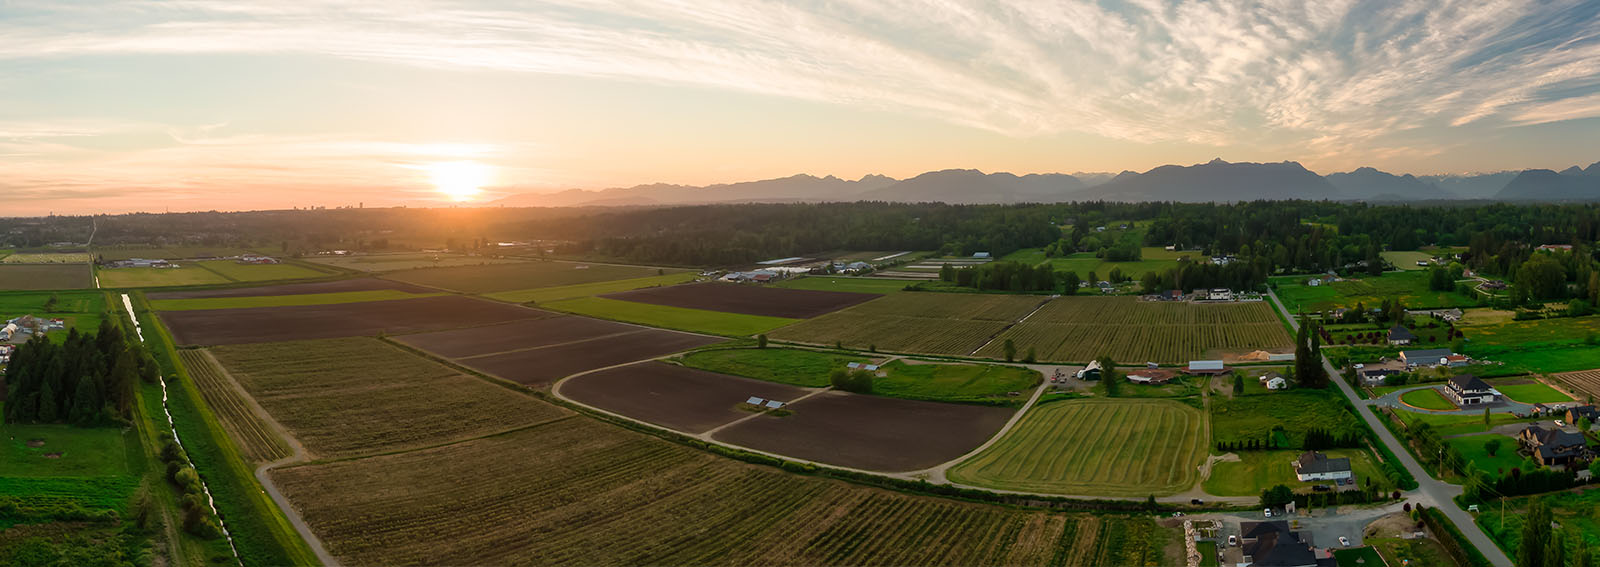 Aerial Panoramic View of Farm Fields during Sunset.